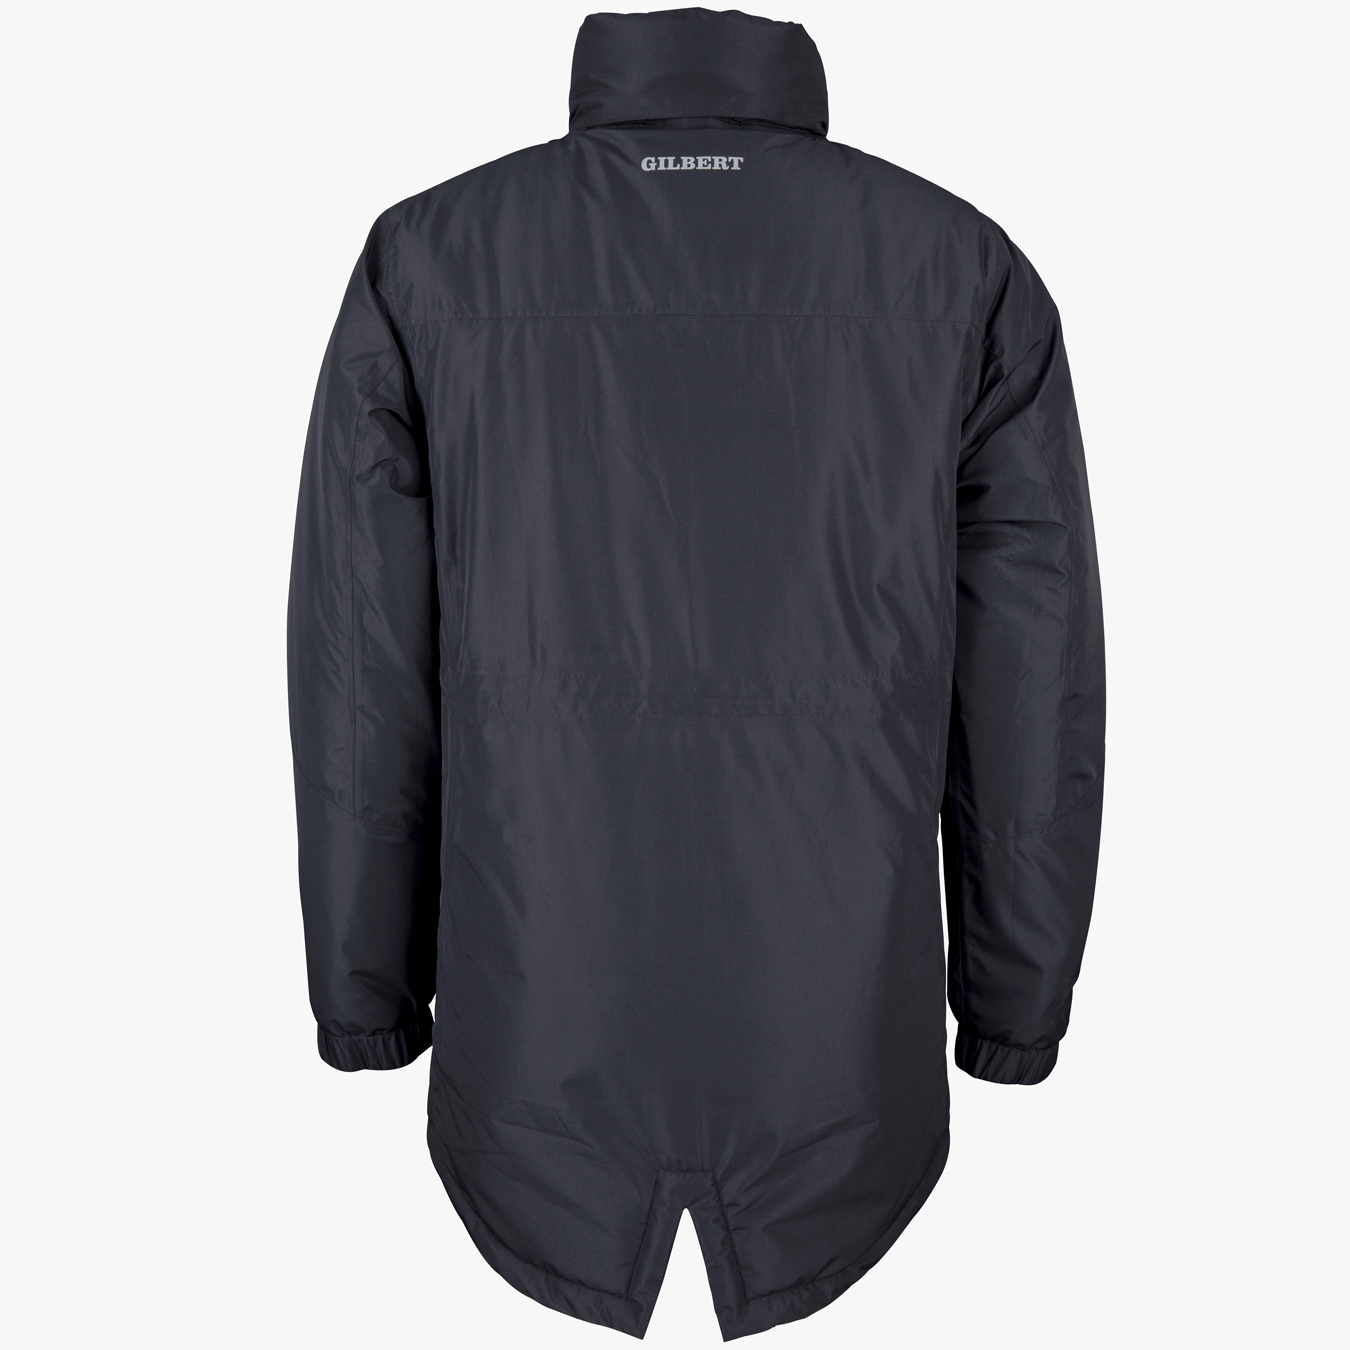 Gilbert Rugby Store Pro AllWeather Jacket Rugby's Original Brand